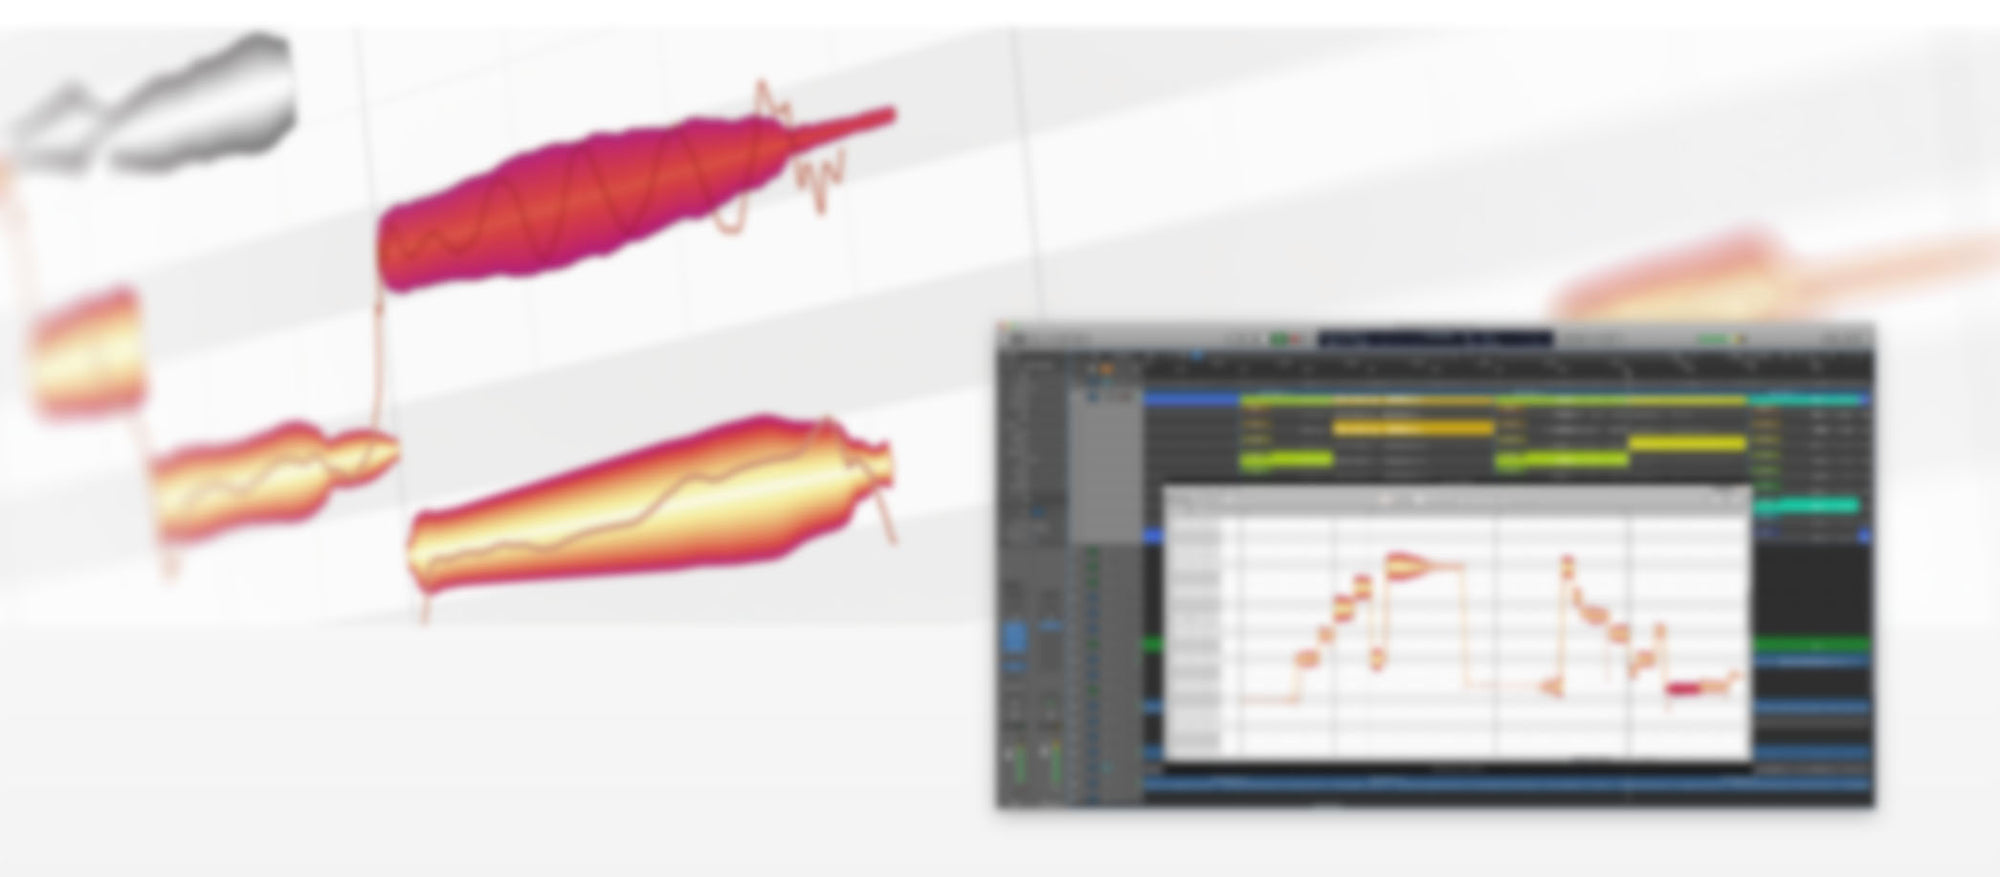 ARA integration is finally here for Melodyne and LPX!